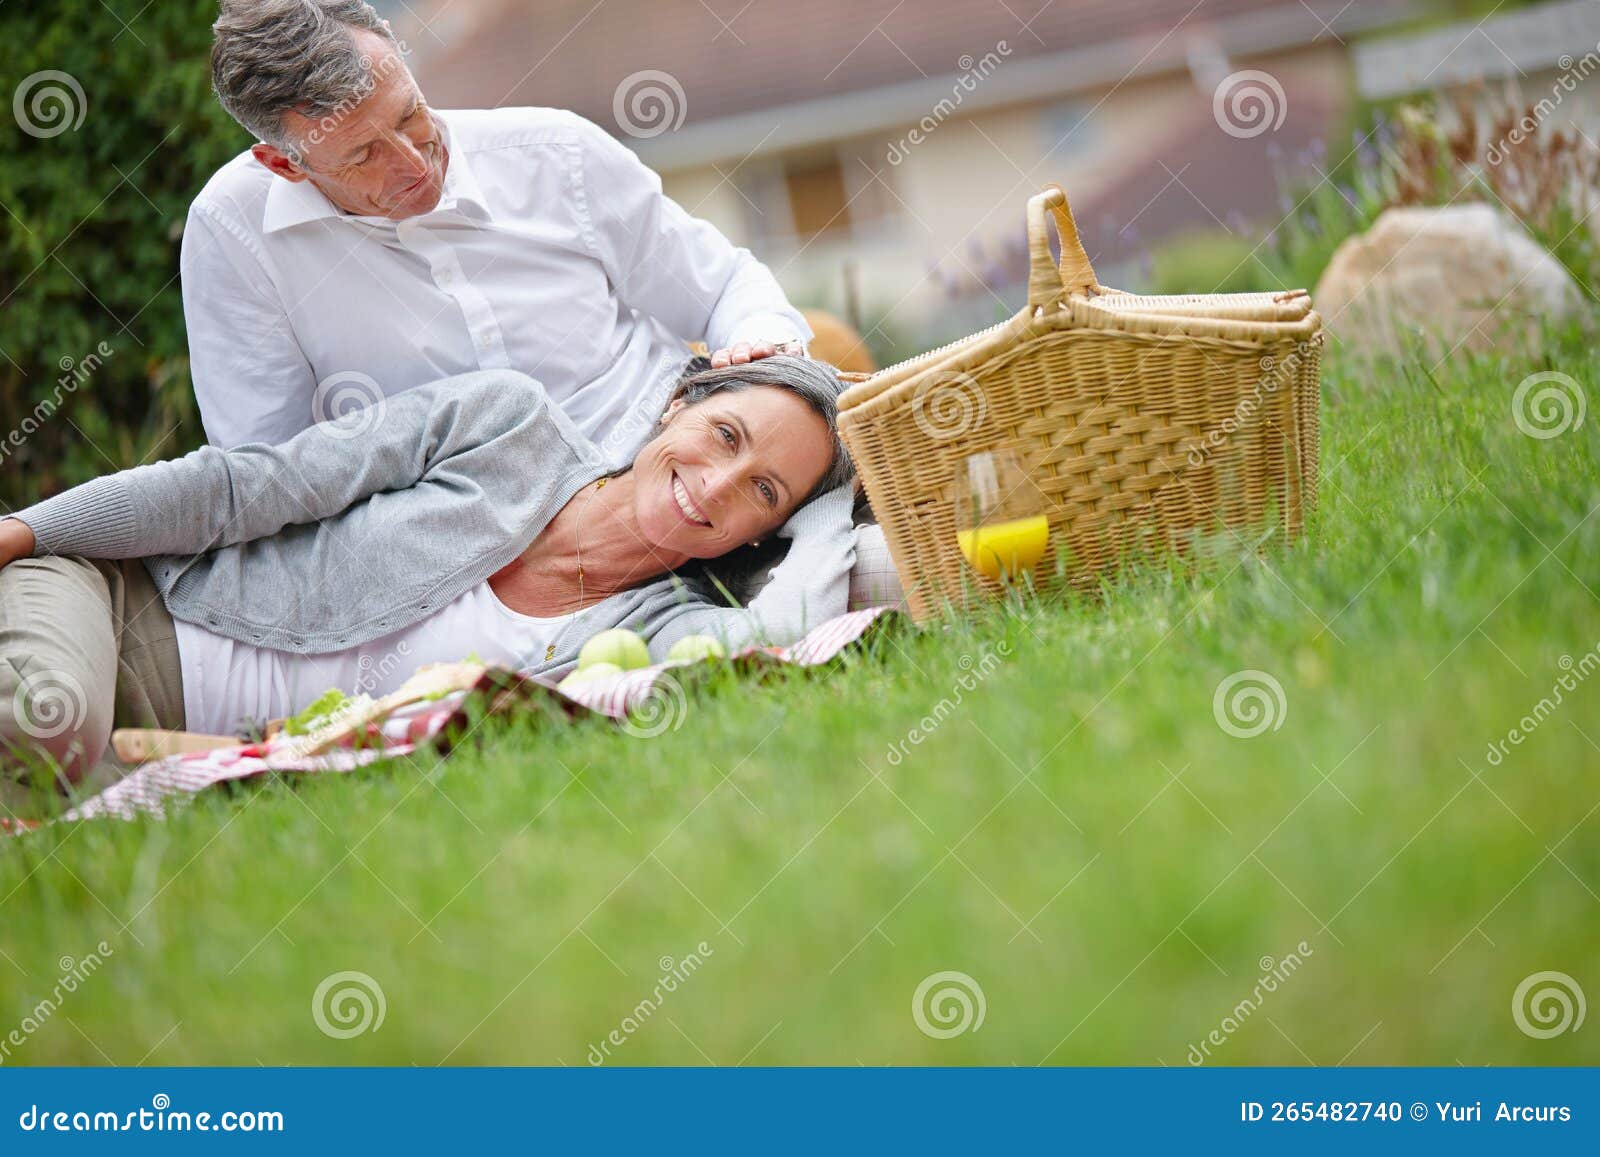 This Is Bliss A Loving Mature Couple Having A Picnic On The Grass